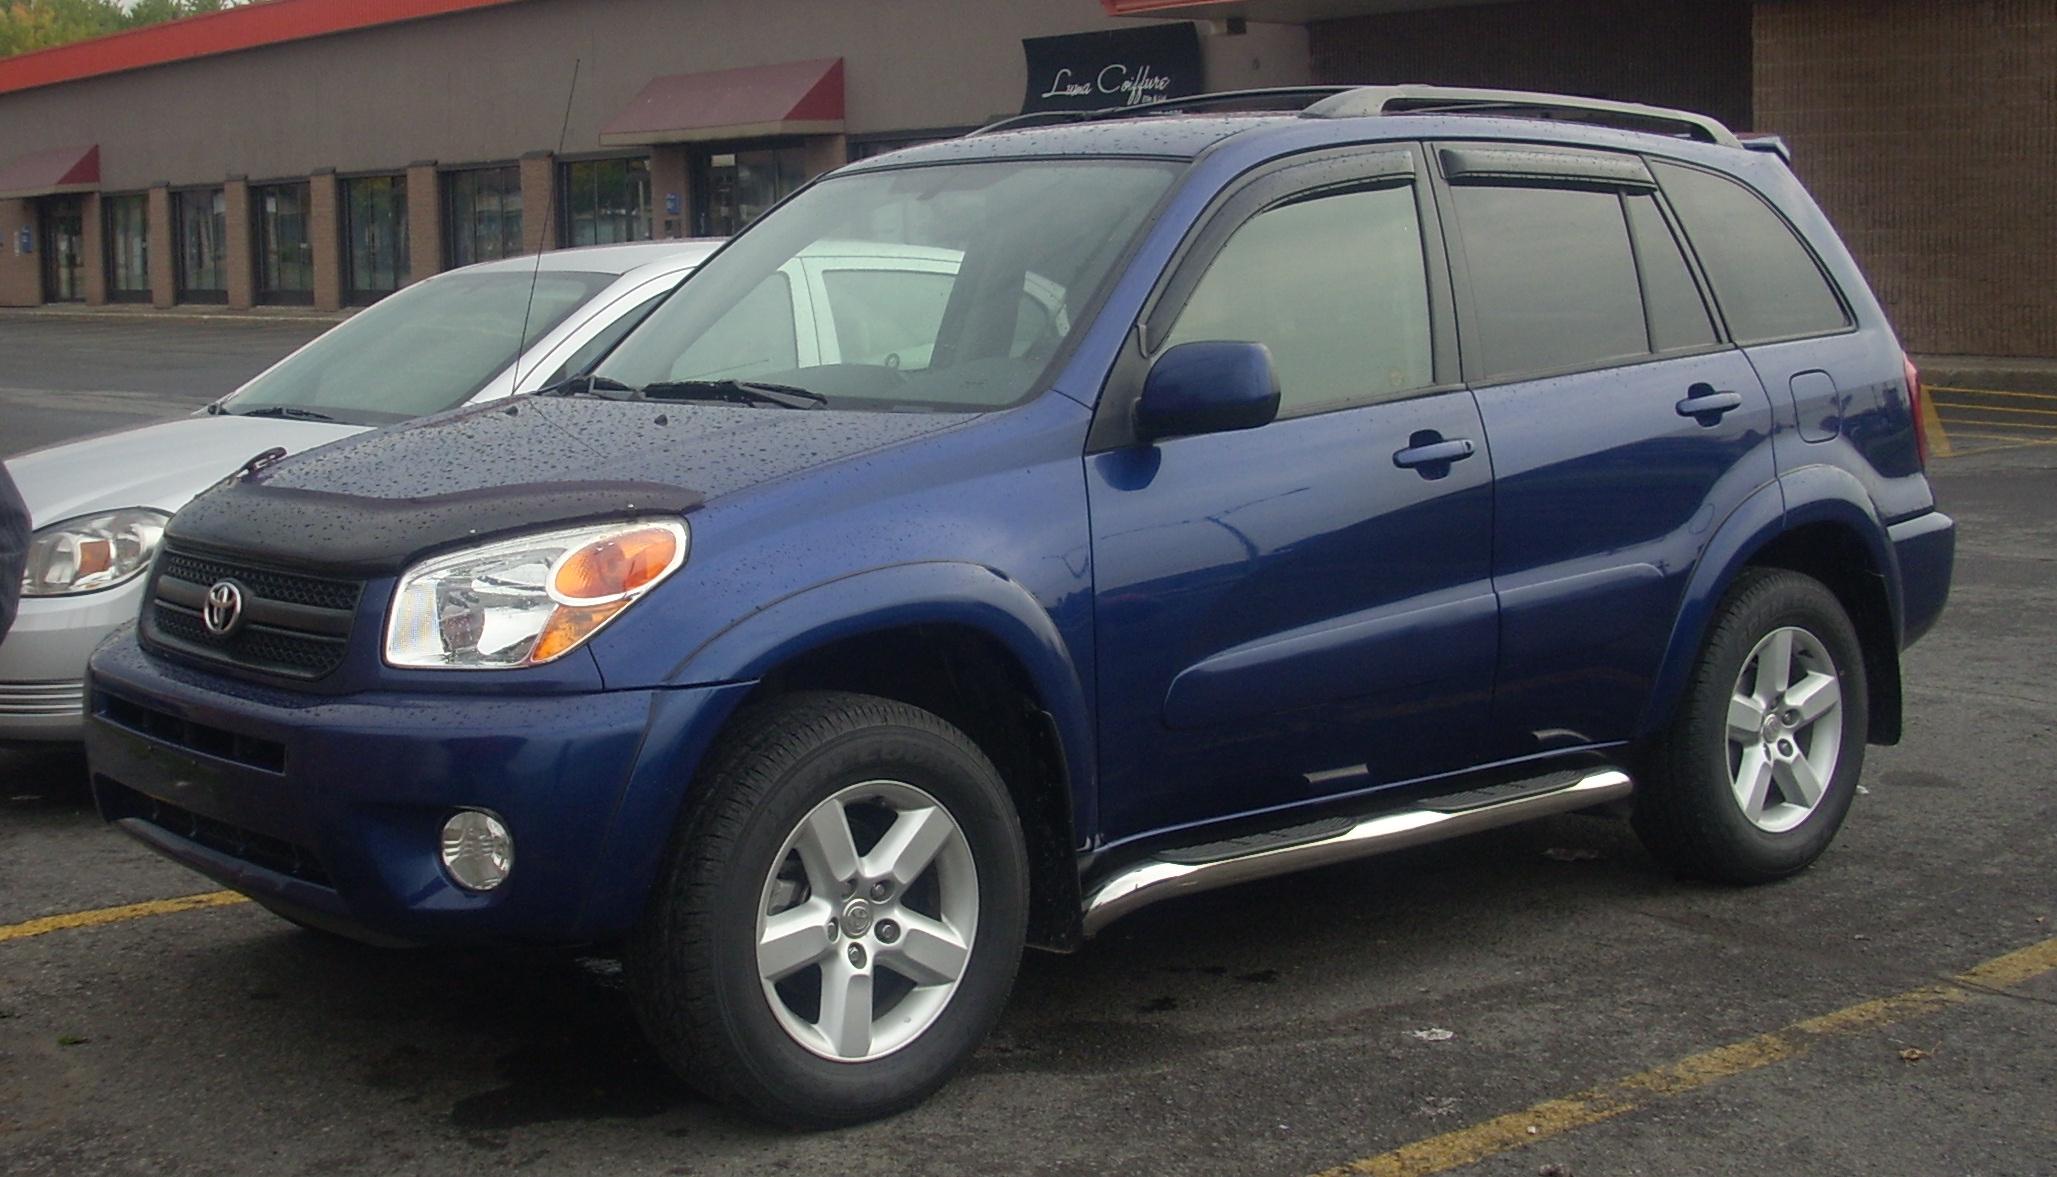 Toyota RAV4 2005 Review, Amazing Pictures and Images